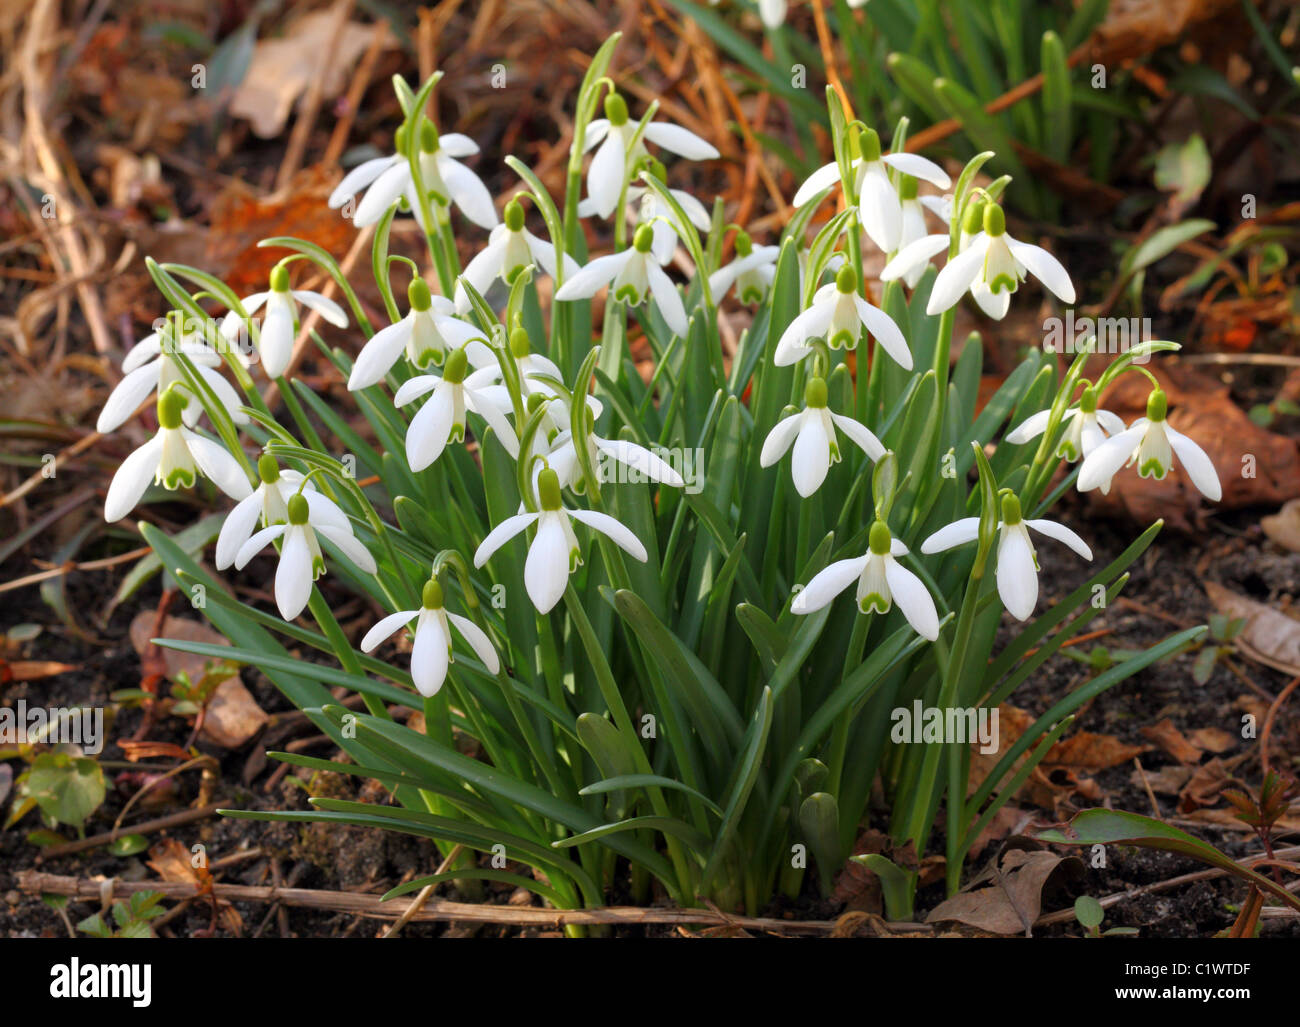 Snowdrops in full bloom Galanthus gracilis Stock Photo